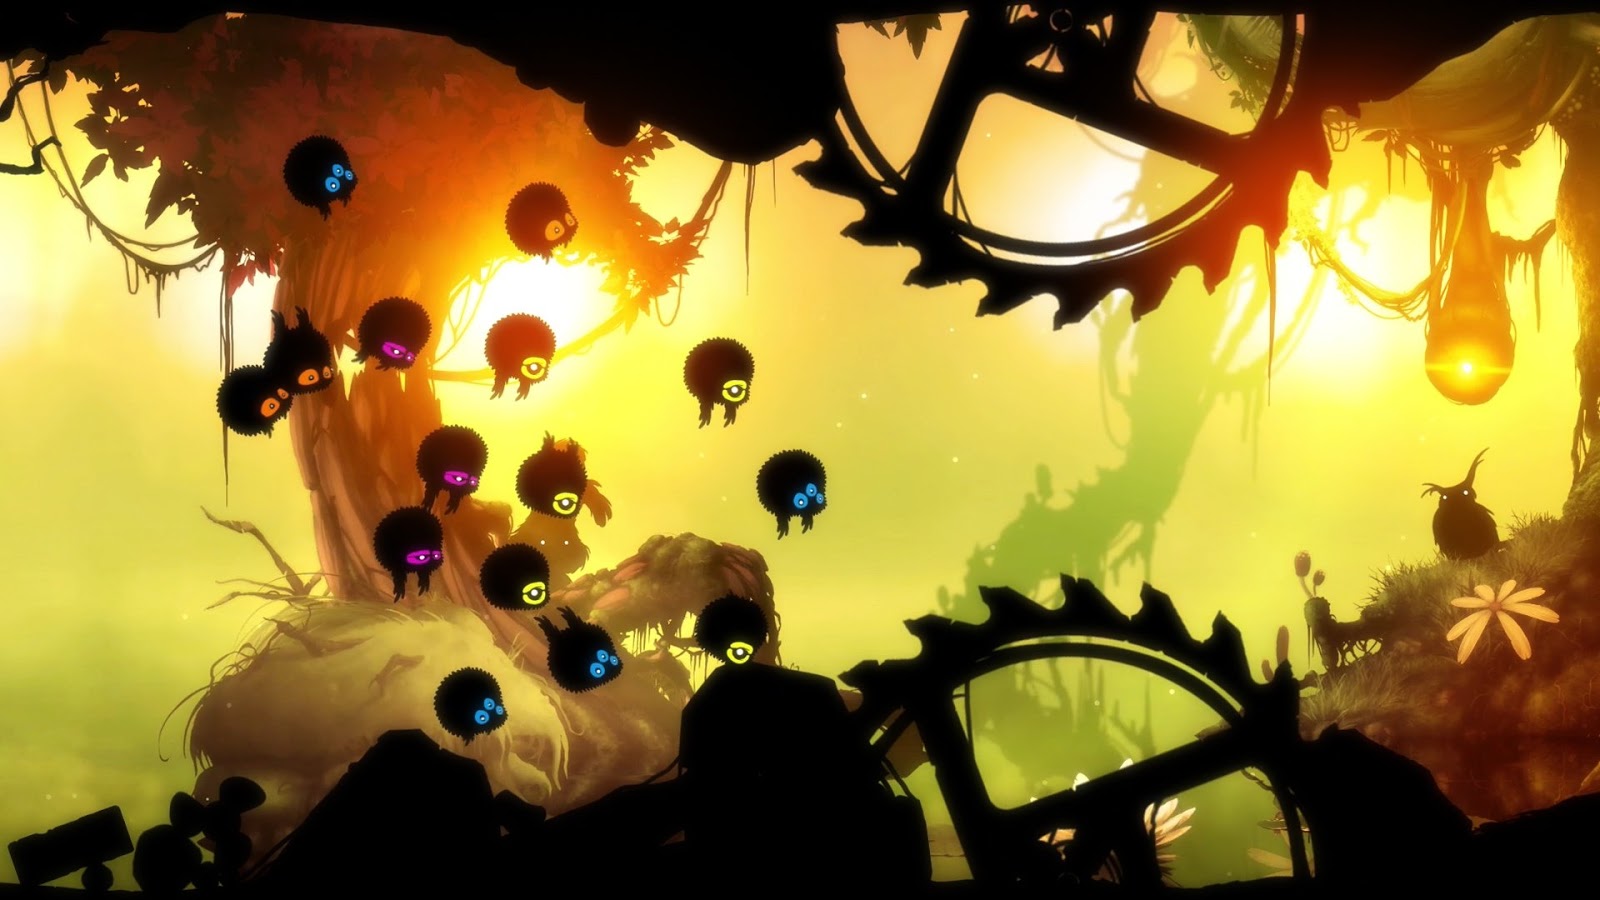 badland game of the year edition spinner level